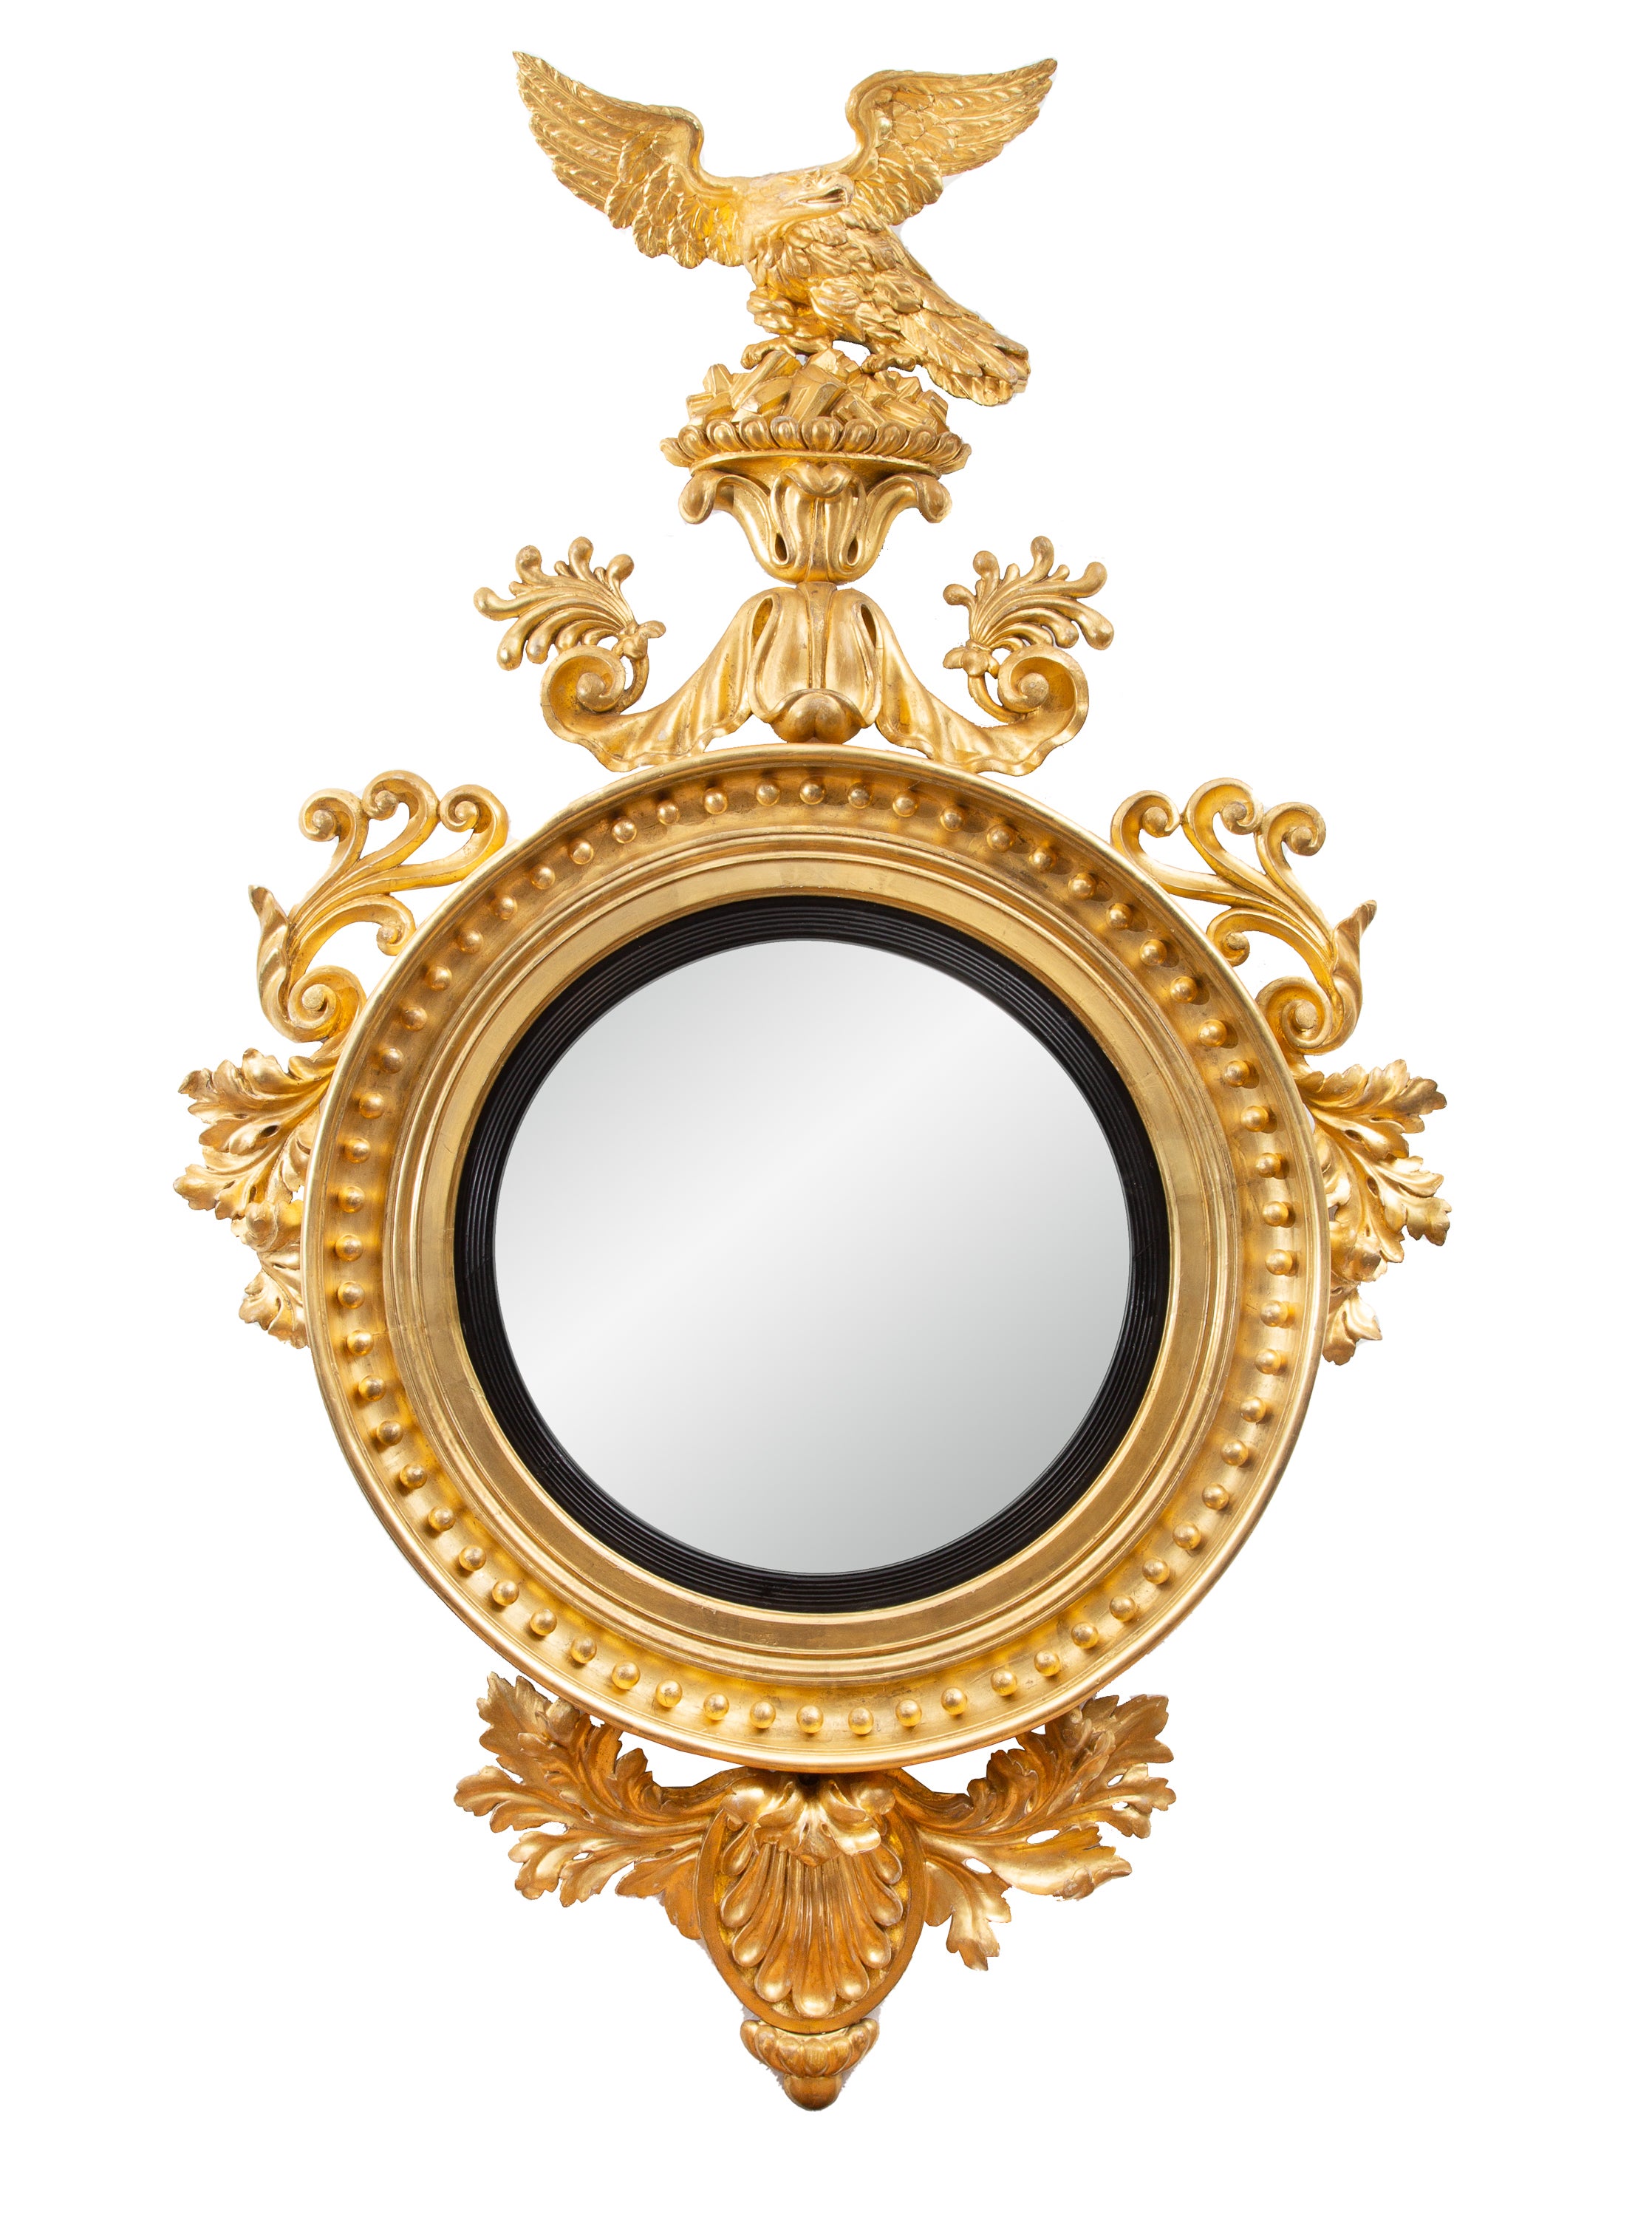 This is an exceptional 19th century water-gilded Continental convex mirror with a bold, prominent eagle situated above a convex mirror plate framed by gilt beads and scrolling ornamentation.